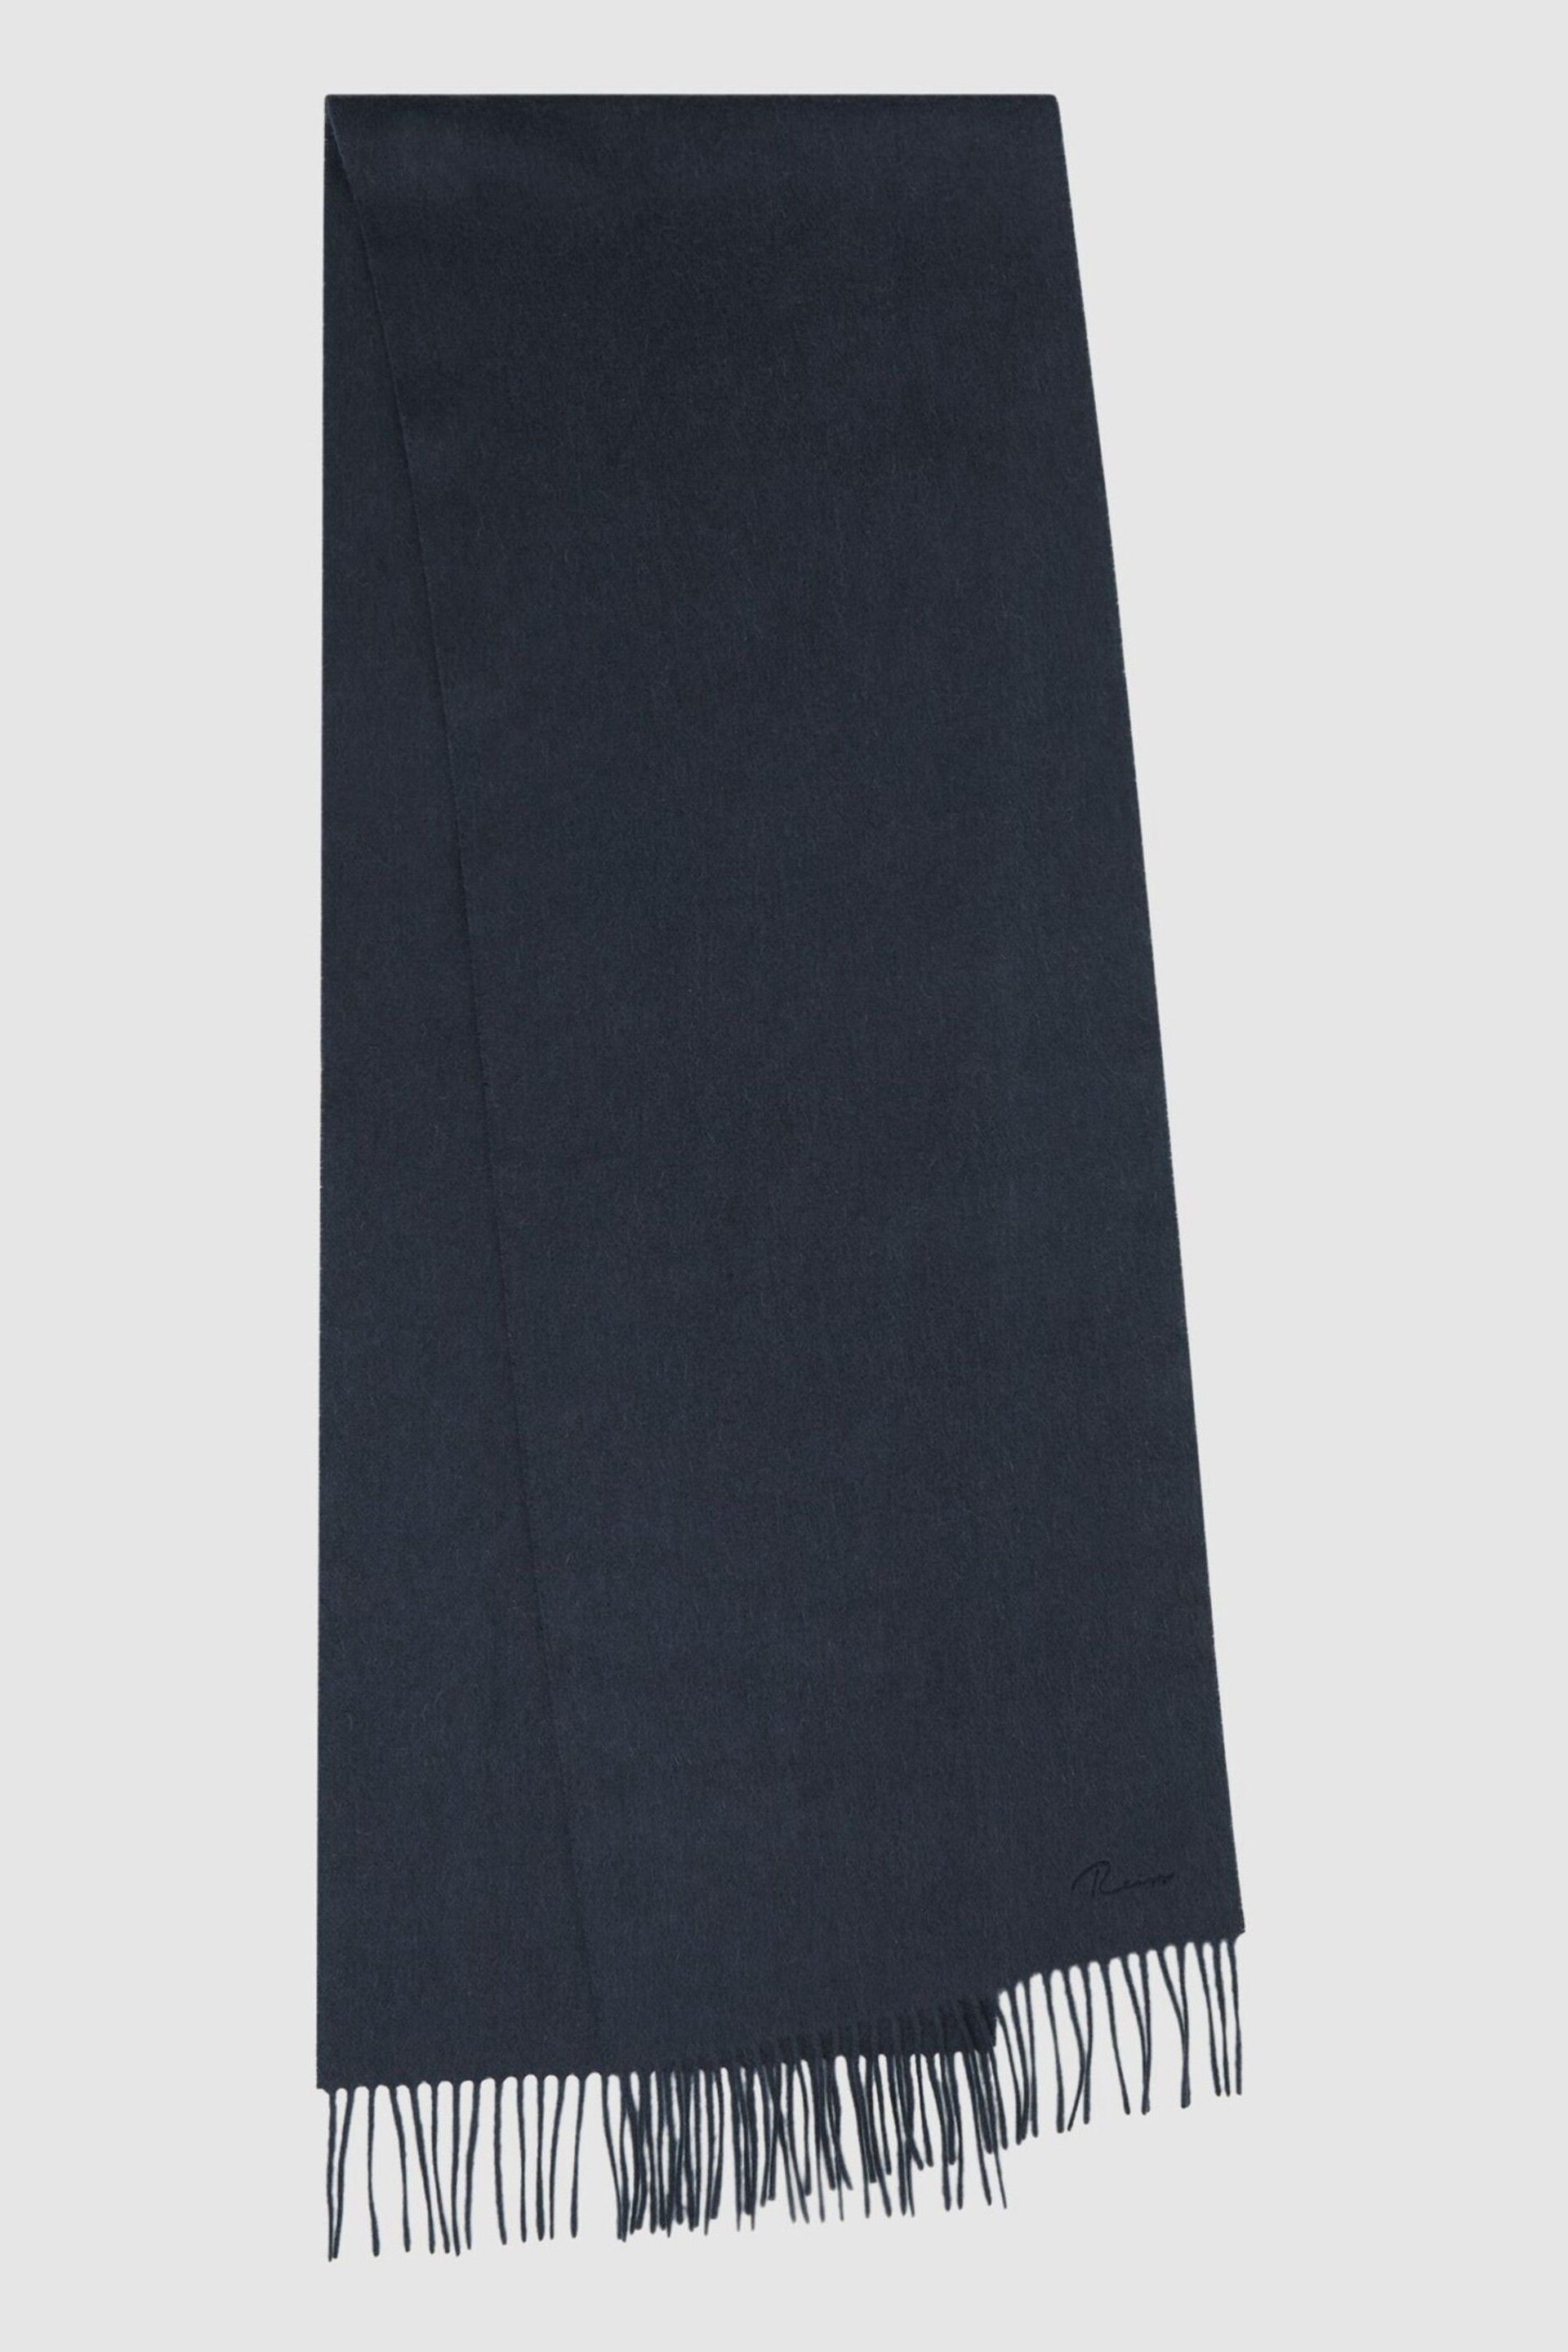 Reiss Airforce Blue Picton Cashmere Blend Scarf - Image 1 of 4